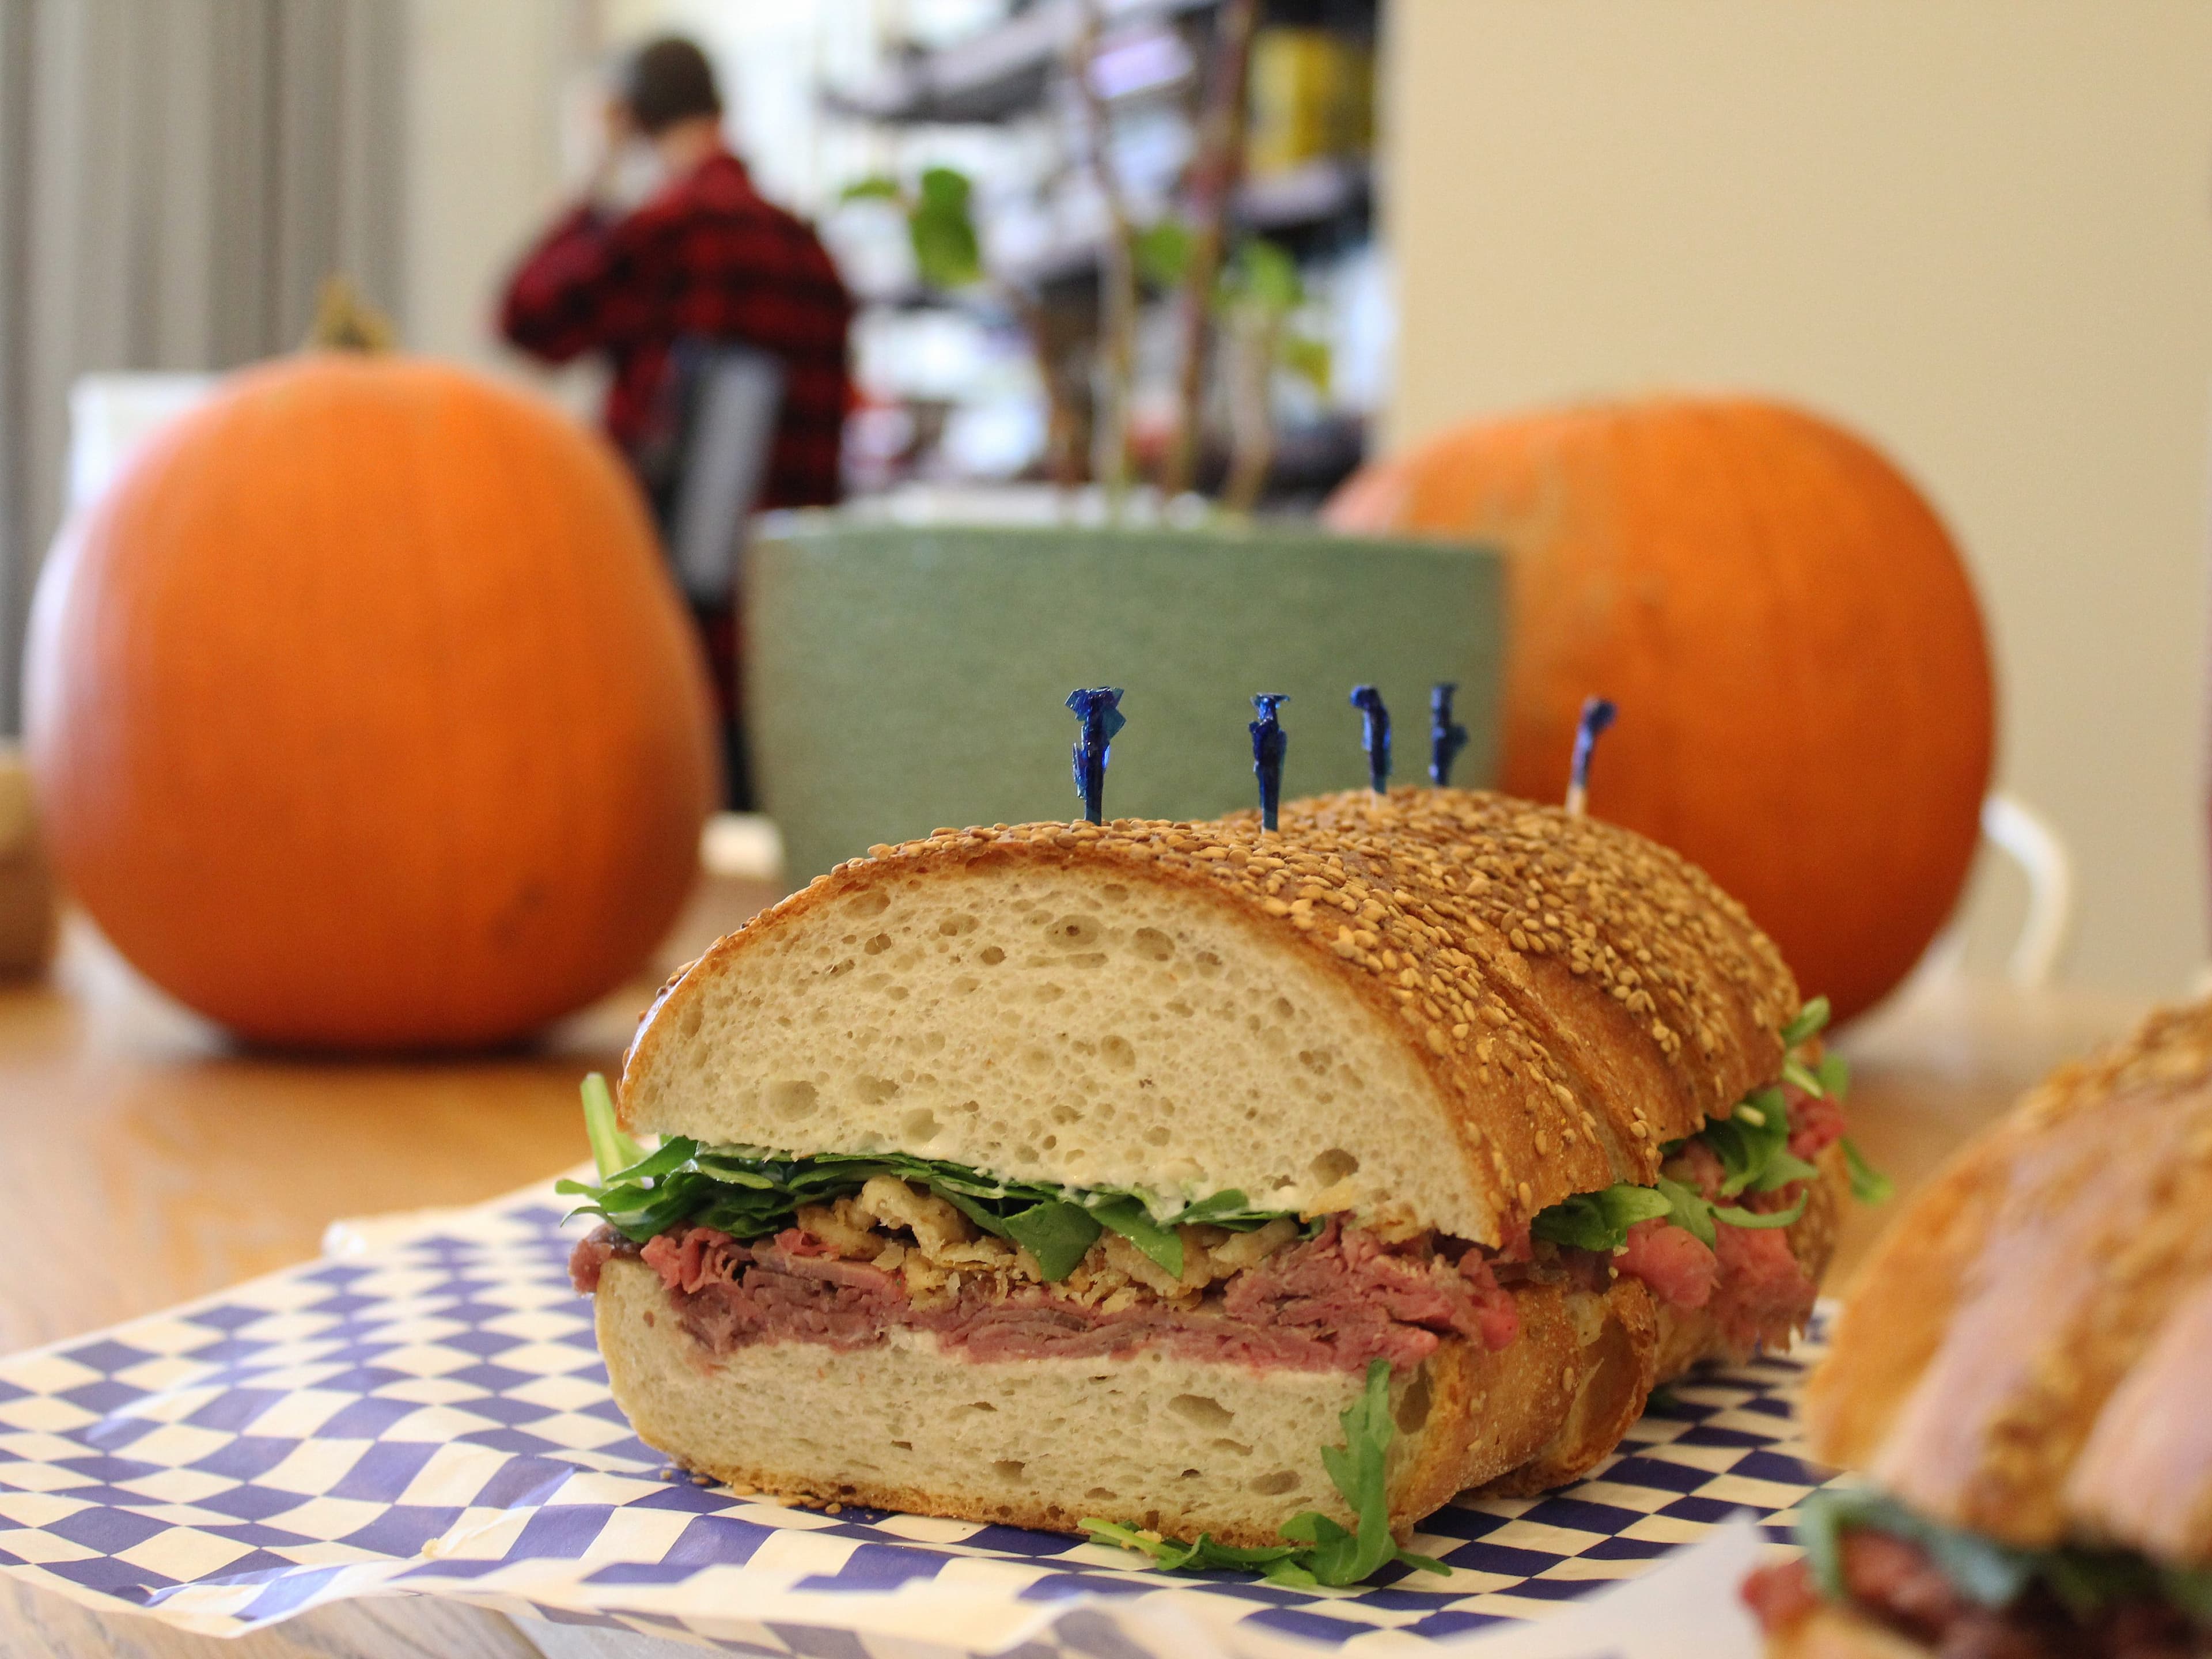 A close-up of a sandwich cut in half, placed on a blue and white checkered paper. The sandwich contains roast beef, arugula, and onions on sesame seed bread. In the background, there are two pumpkins and a blurred person in a red plaid shirt.